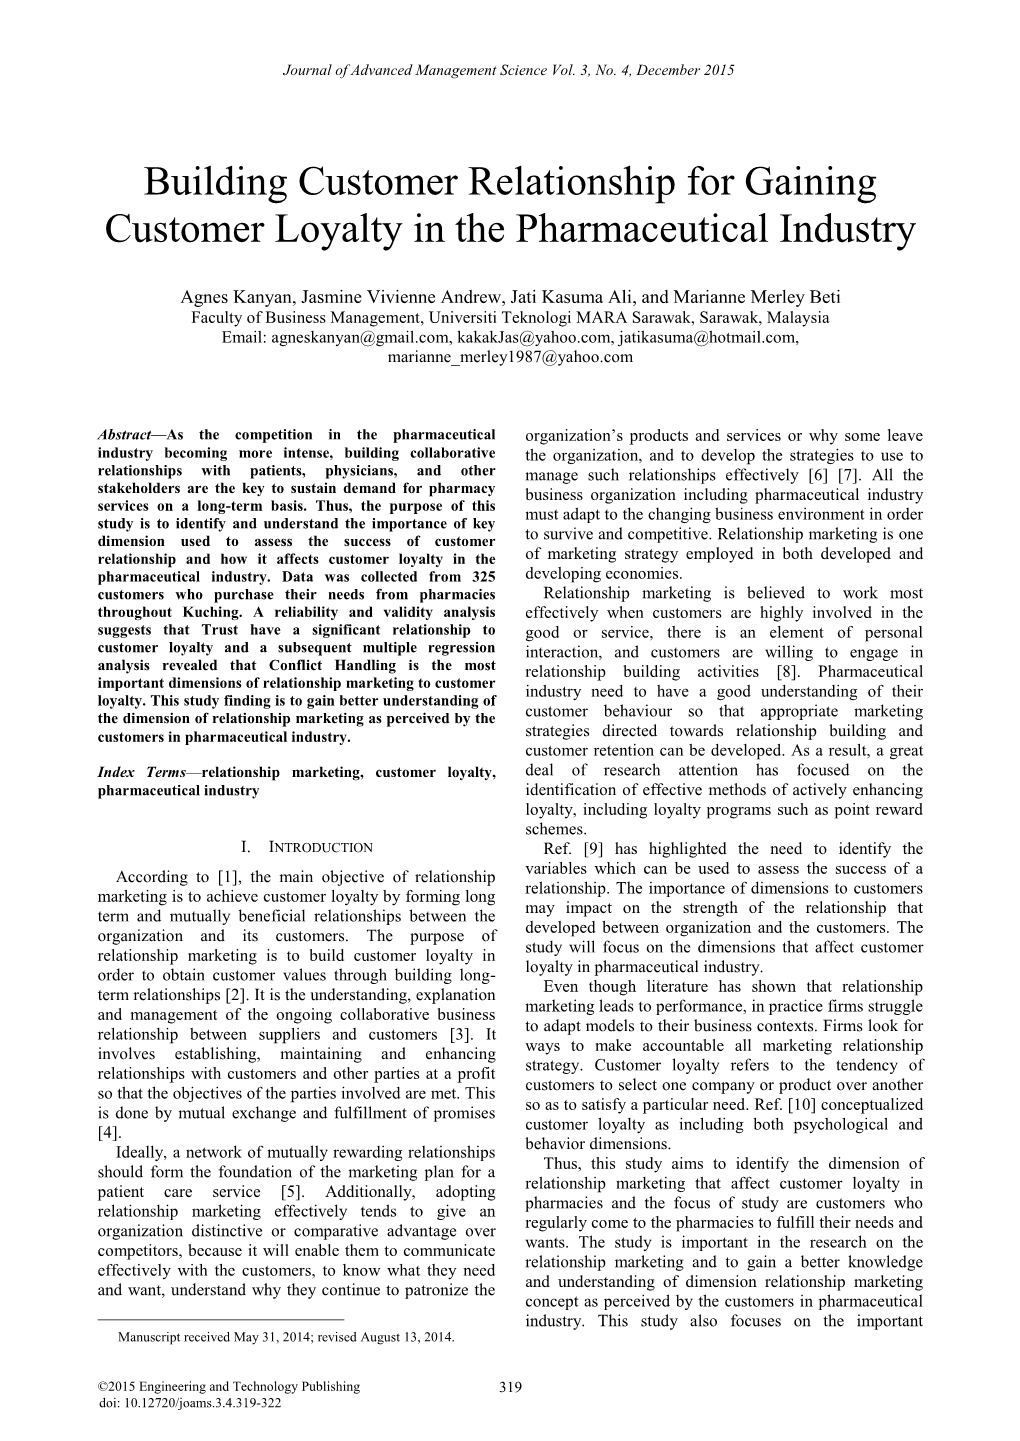 Building Customer Relationship for Gaining Customer Loyalty in the Pharmaceutical Industry